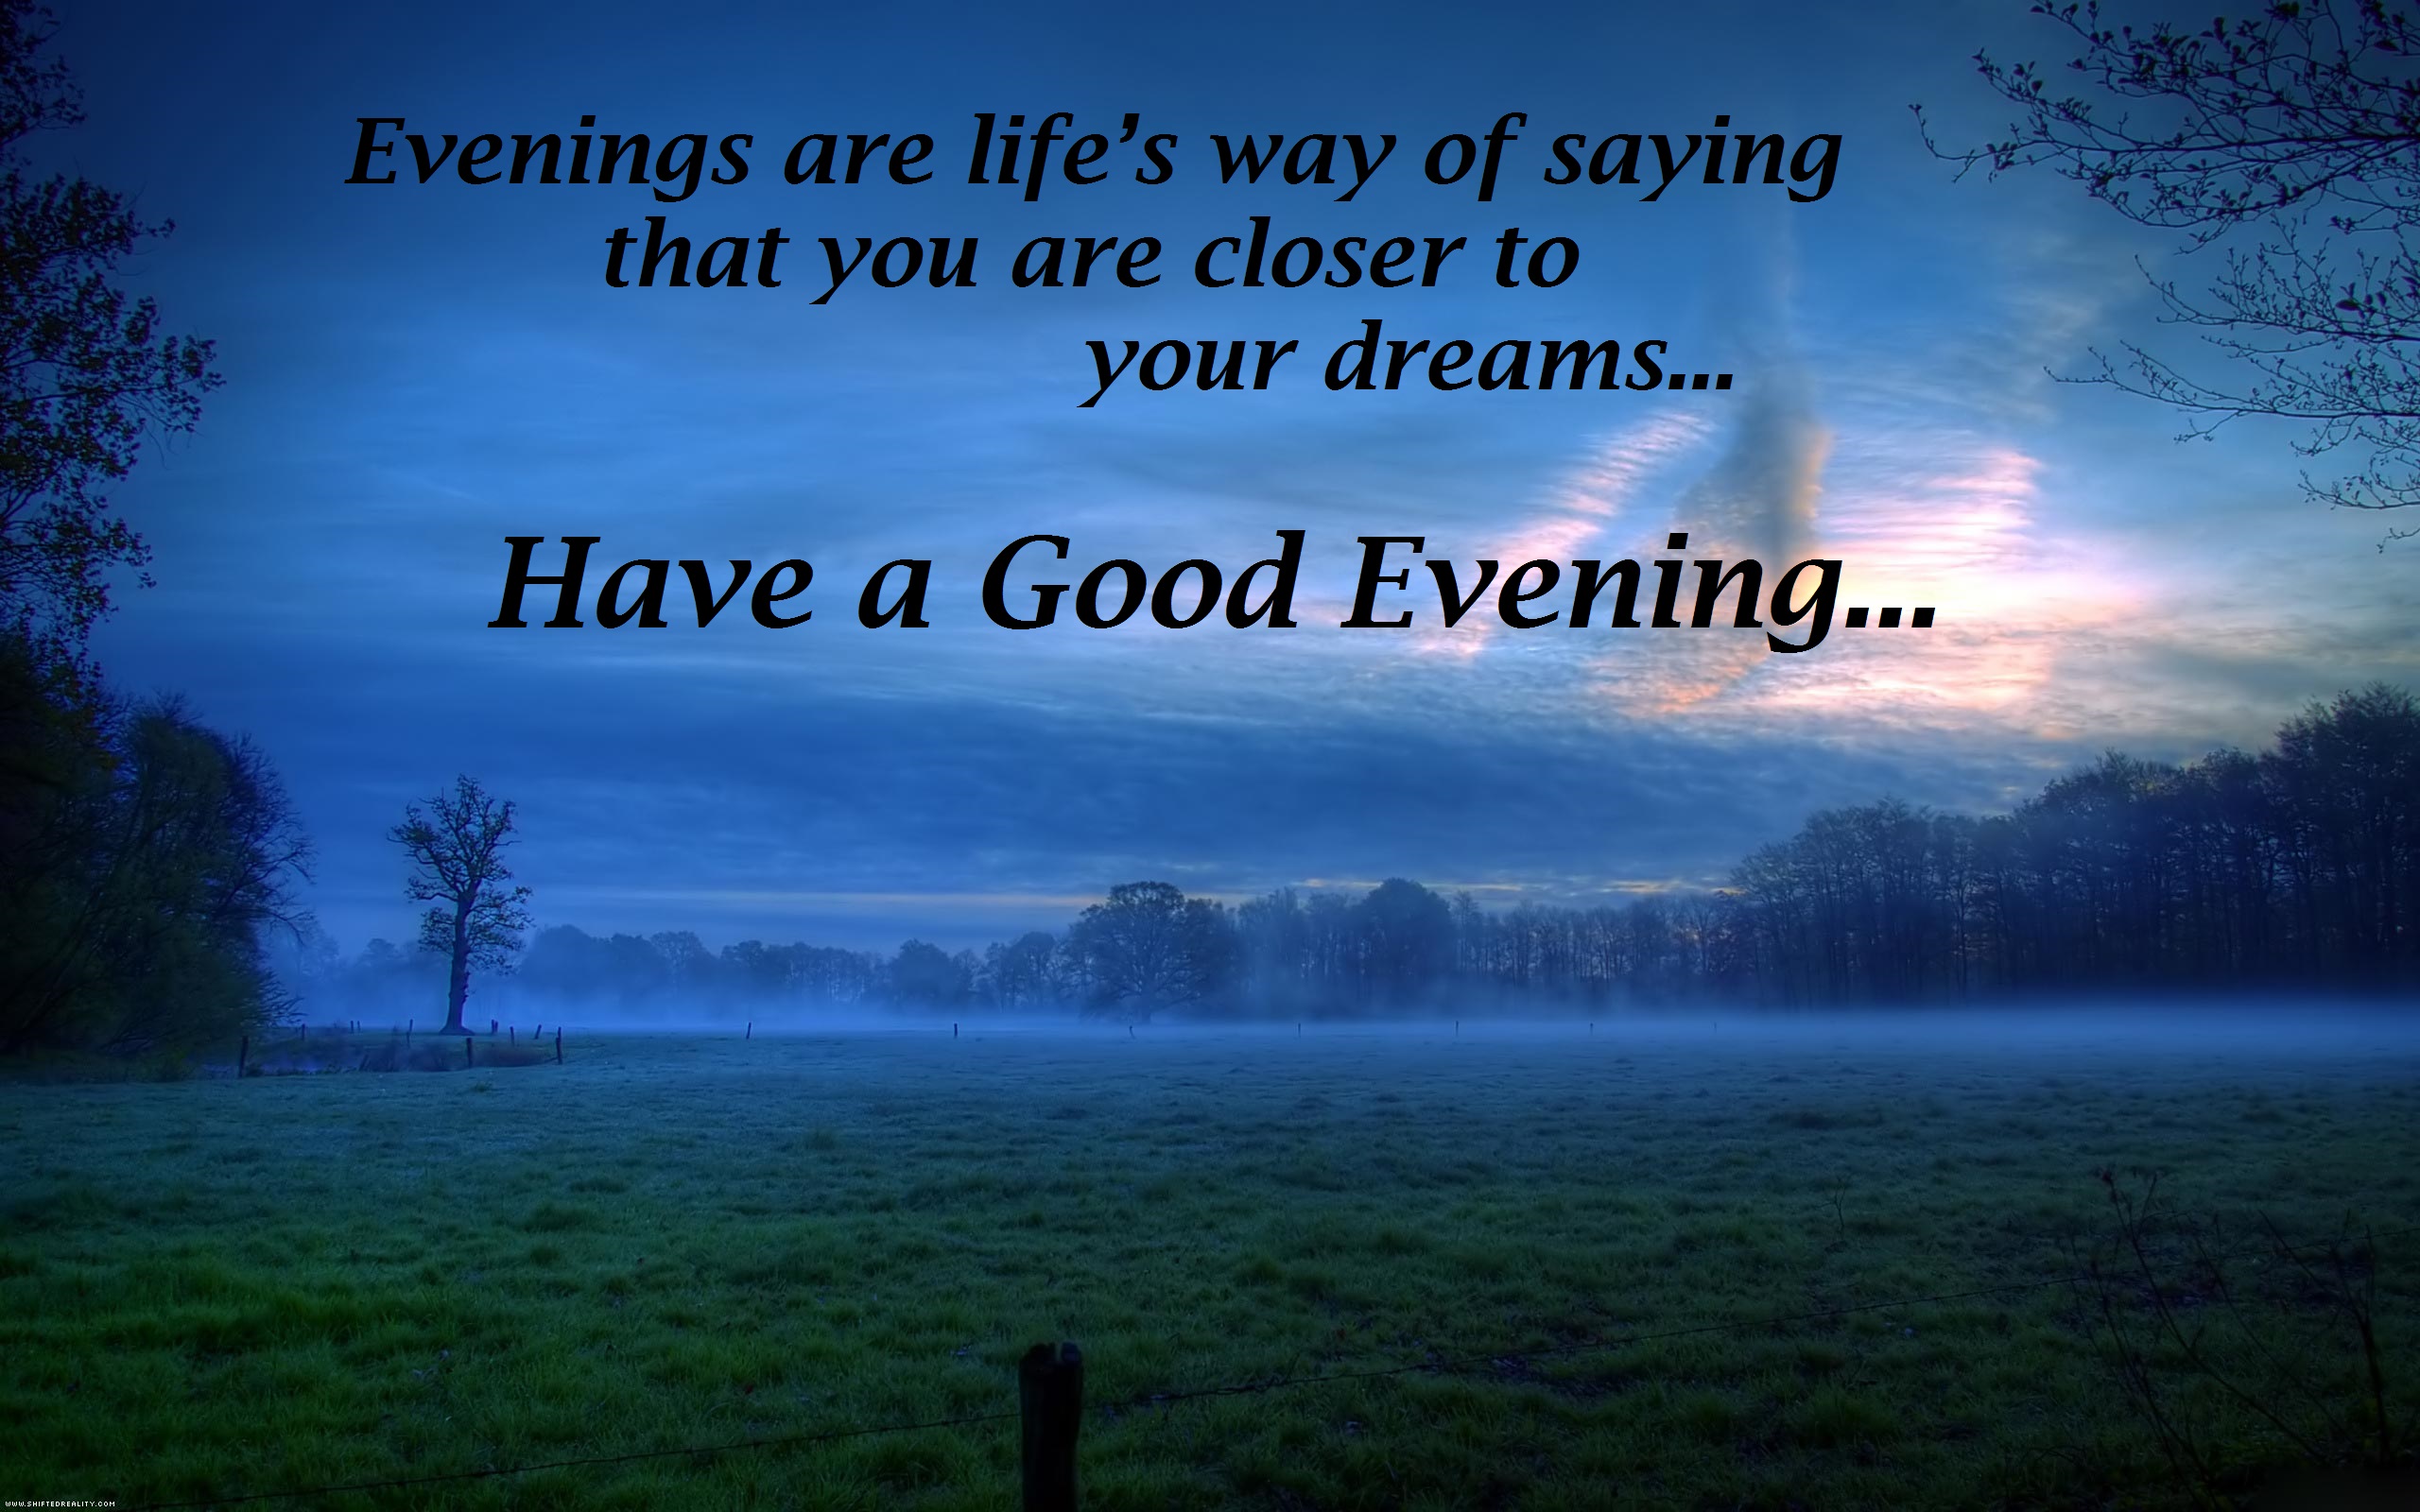 image for evening quotes